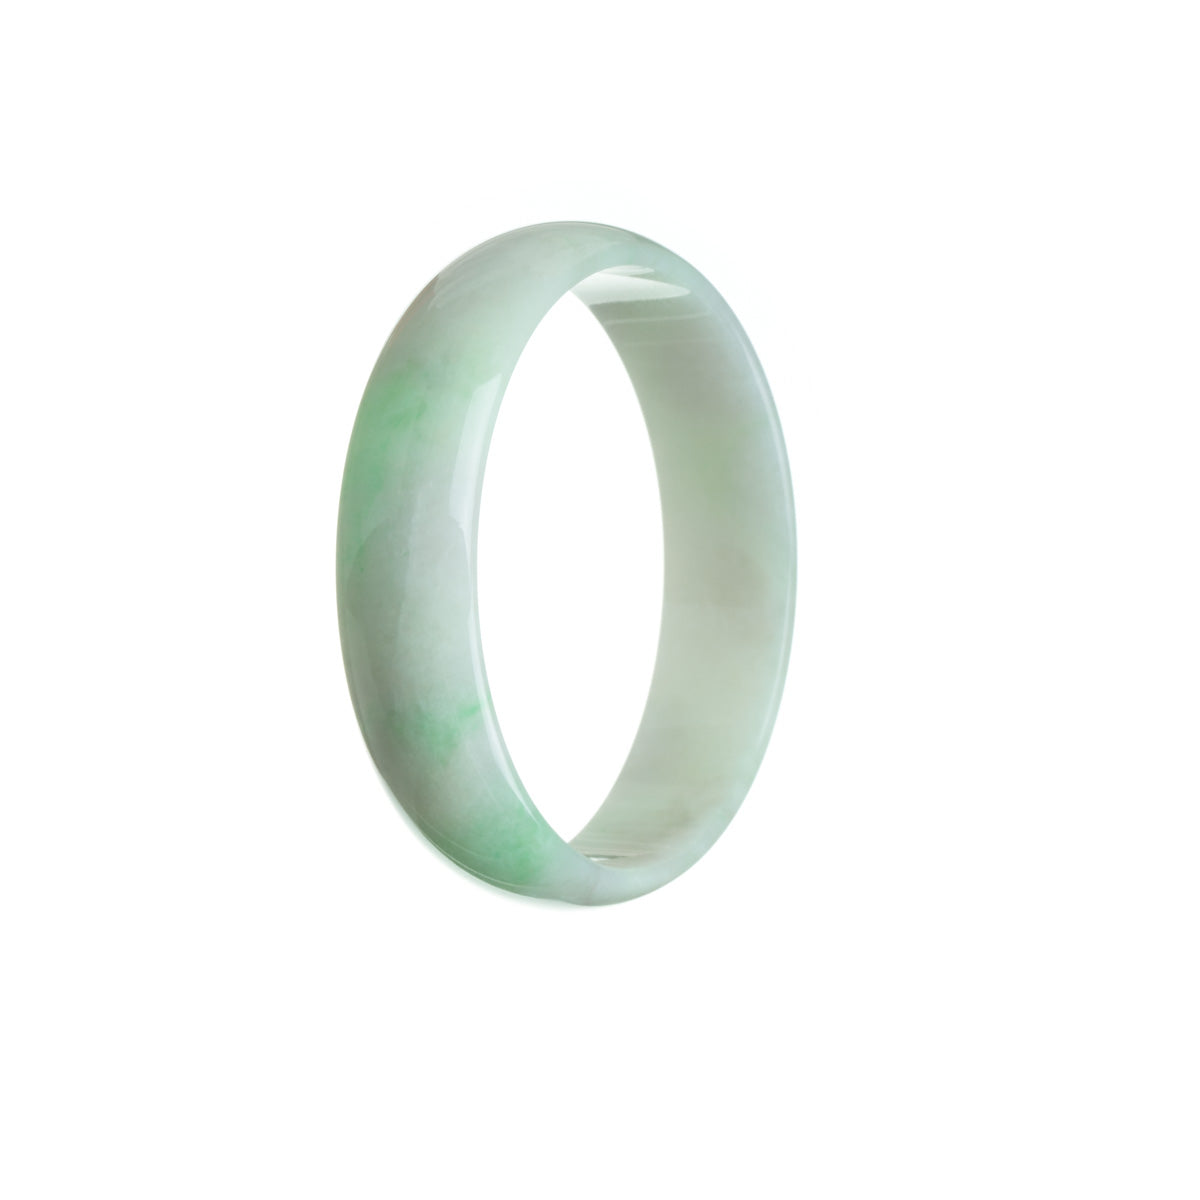 A close-up photo of a beautiful white and green Jadeite jade bangle bracelet. The bracelet has a flat shape and a diameter of 52mm. It is made from genuine, untreated jade and is designed by MAYS™.